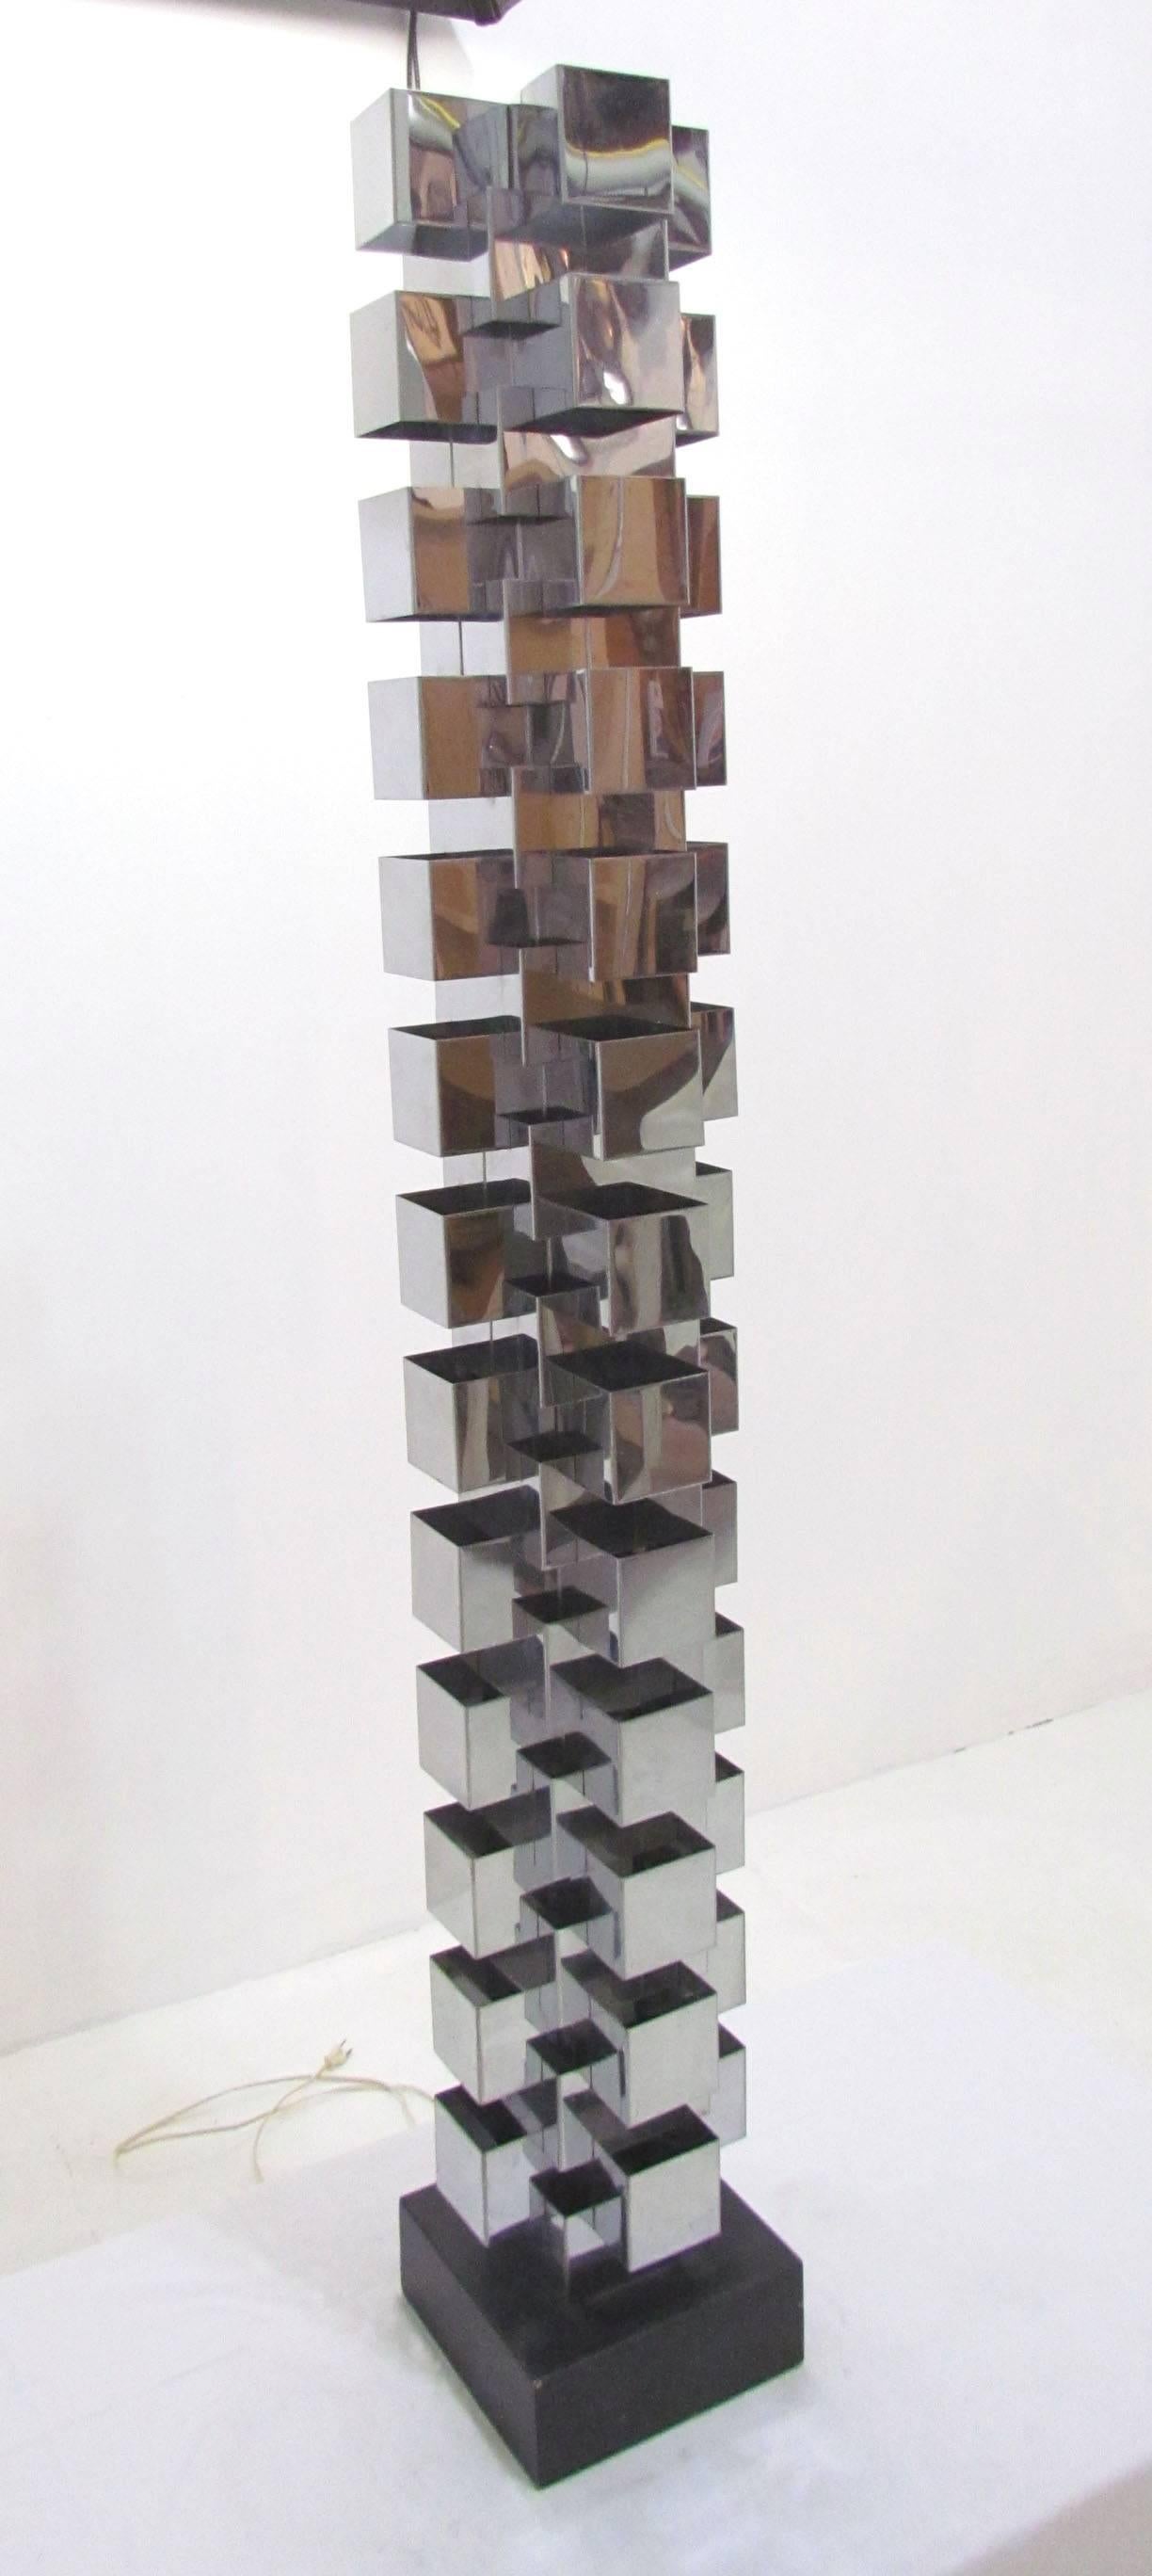 Large scale architectural floor lamp of interlocking chrome blocks by Curtis Jere, circa 1960s.